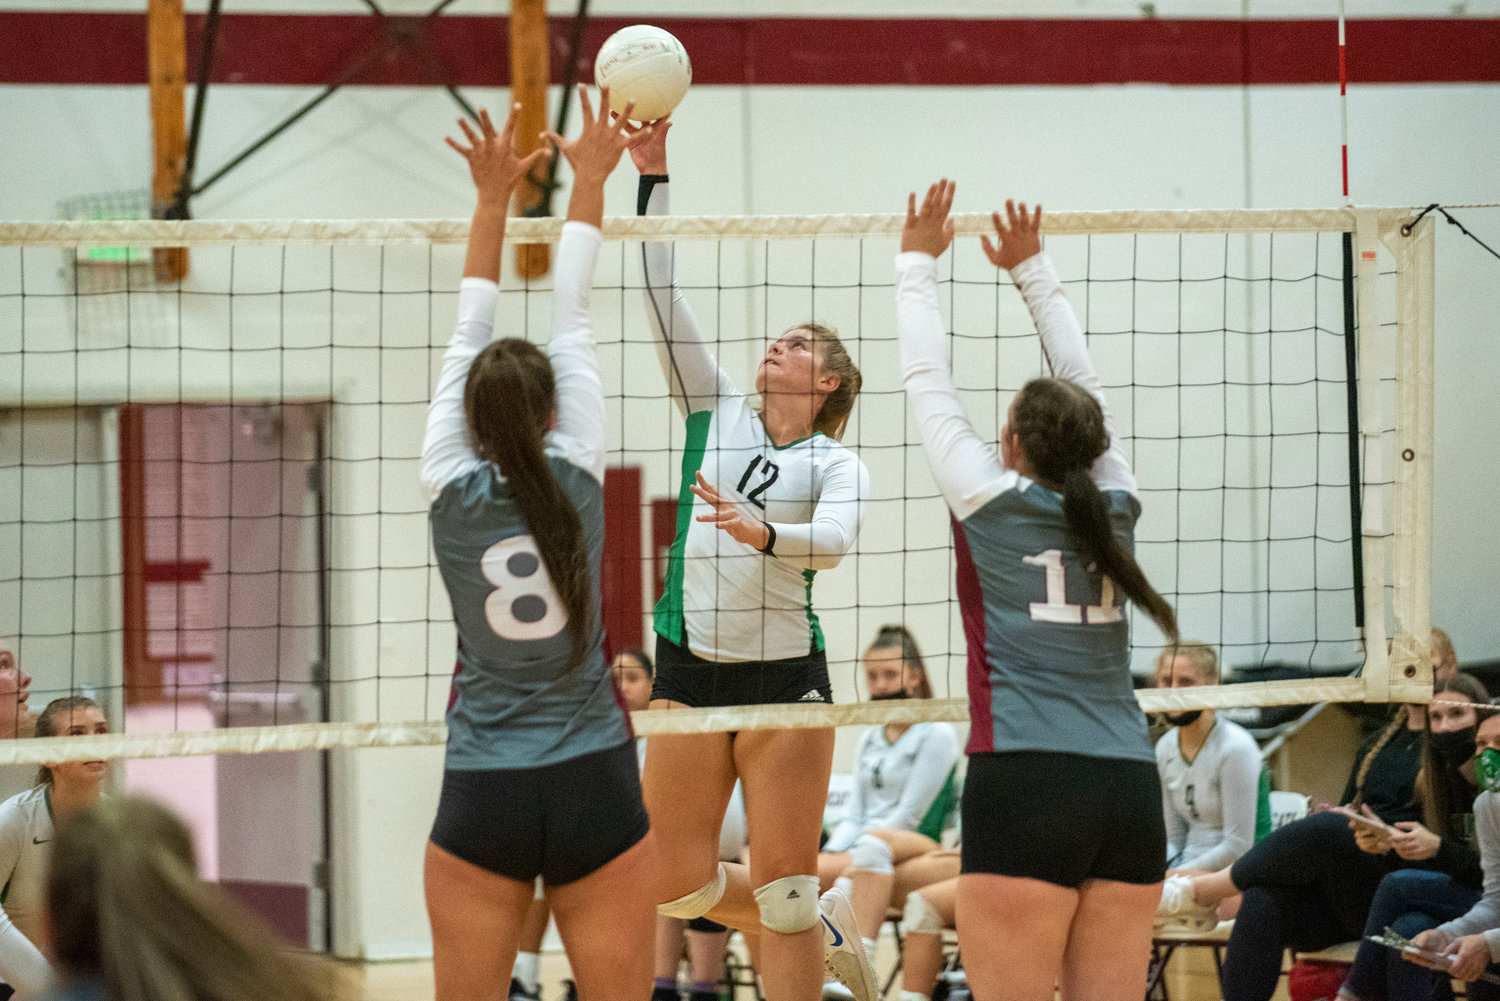 Tumwater's Madison Hurley (12) tips a ball over against W.F. West's Anna White (8) and Savannah Hawkins (11) on Oct. 14, 2021.